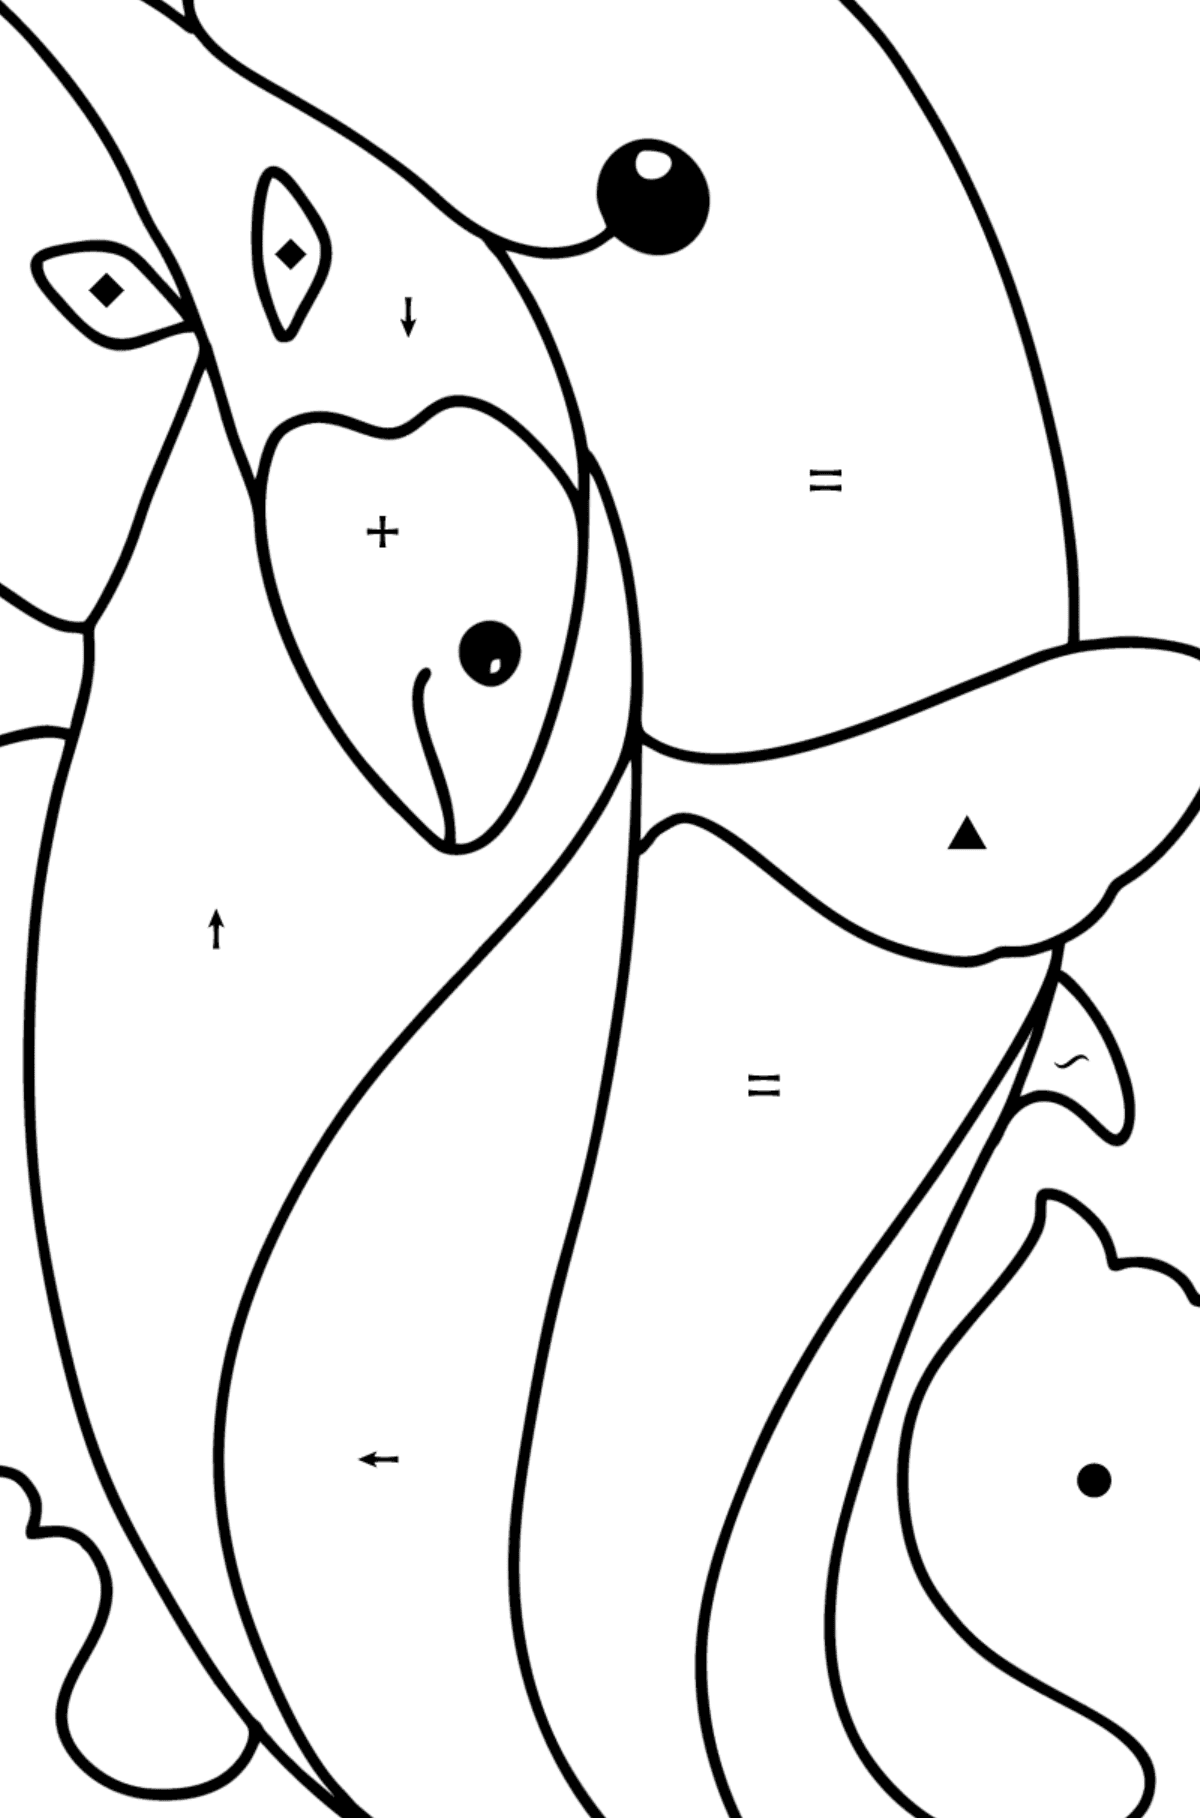 Dolphin Caught a Fish coloring page - Coloring by Symbols for Kids